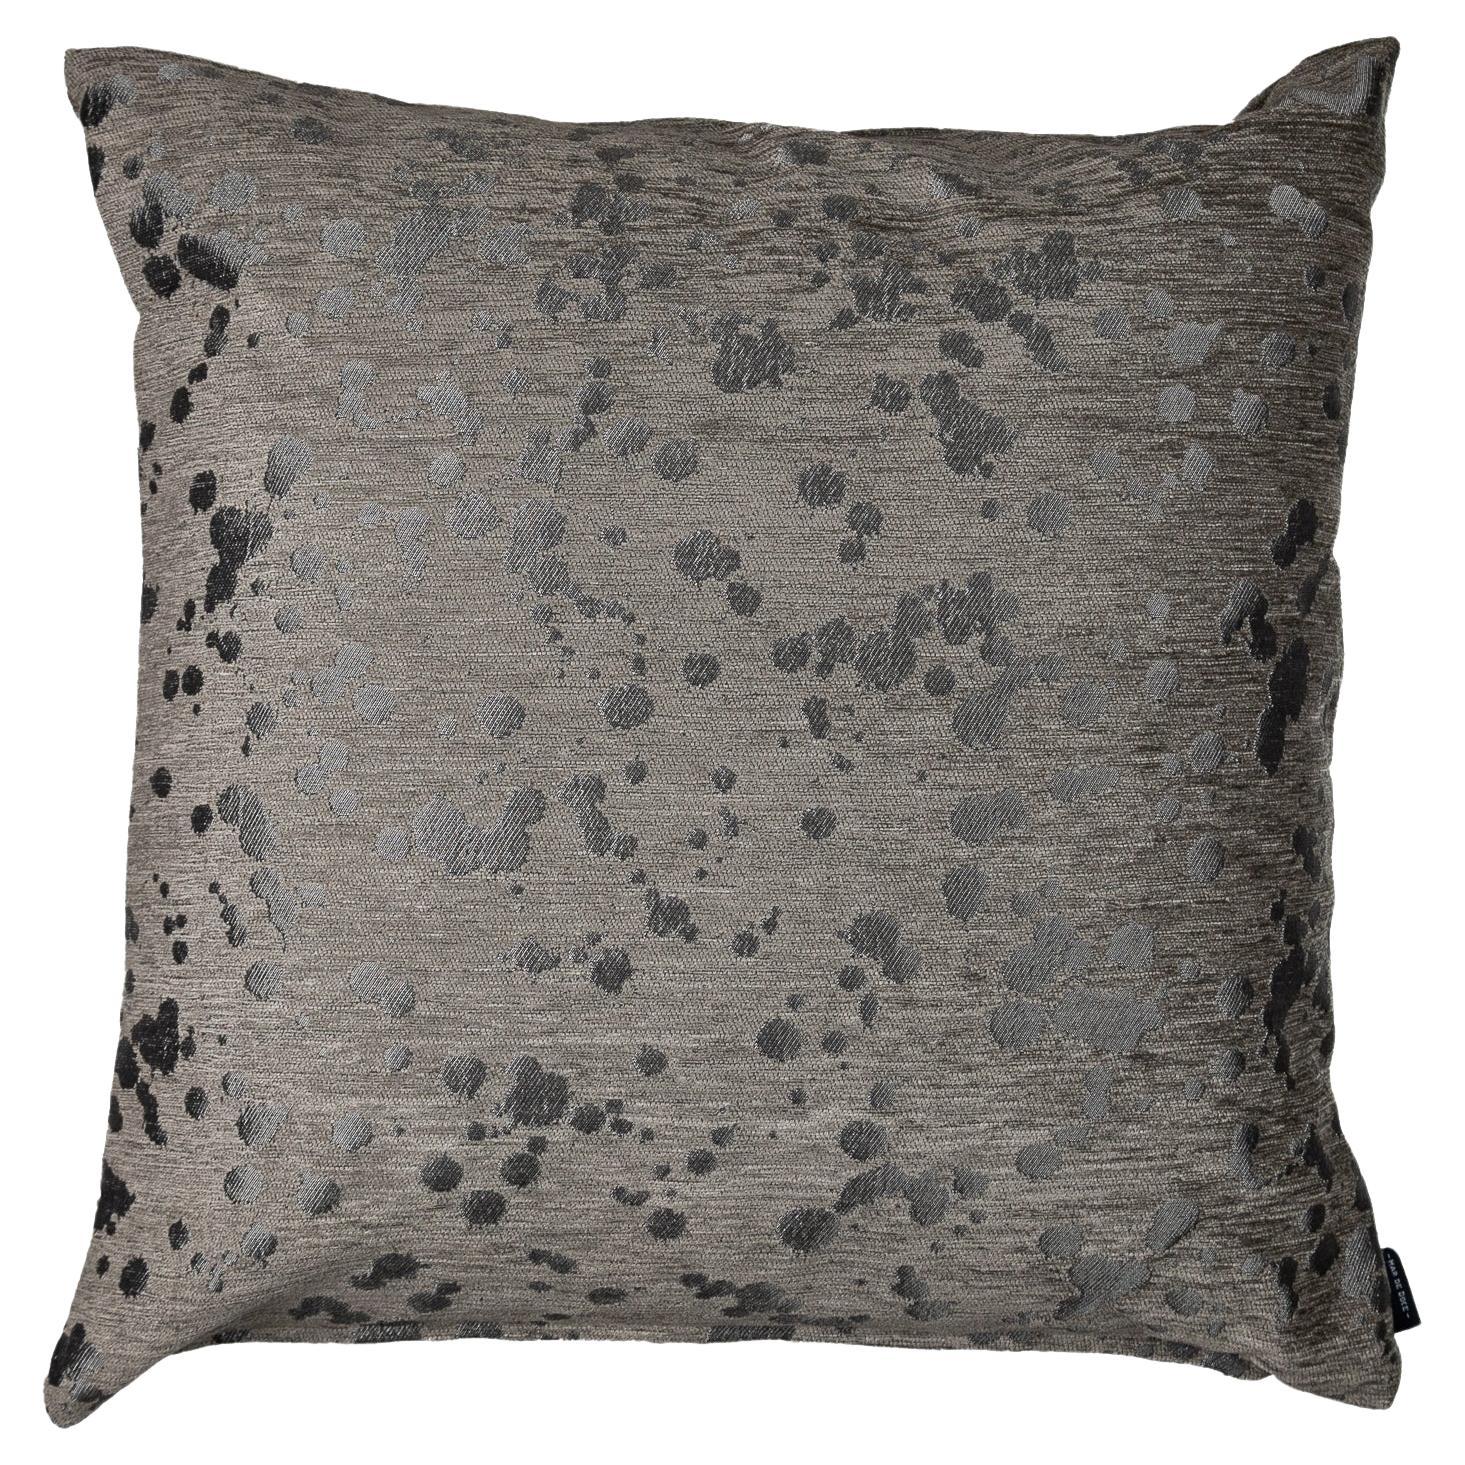 RAIN- Gray throw pillow in imported fabrics that resemble rain by Mar de Doce For Sale